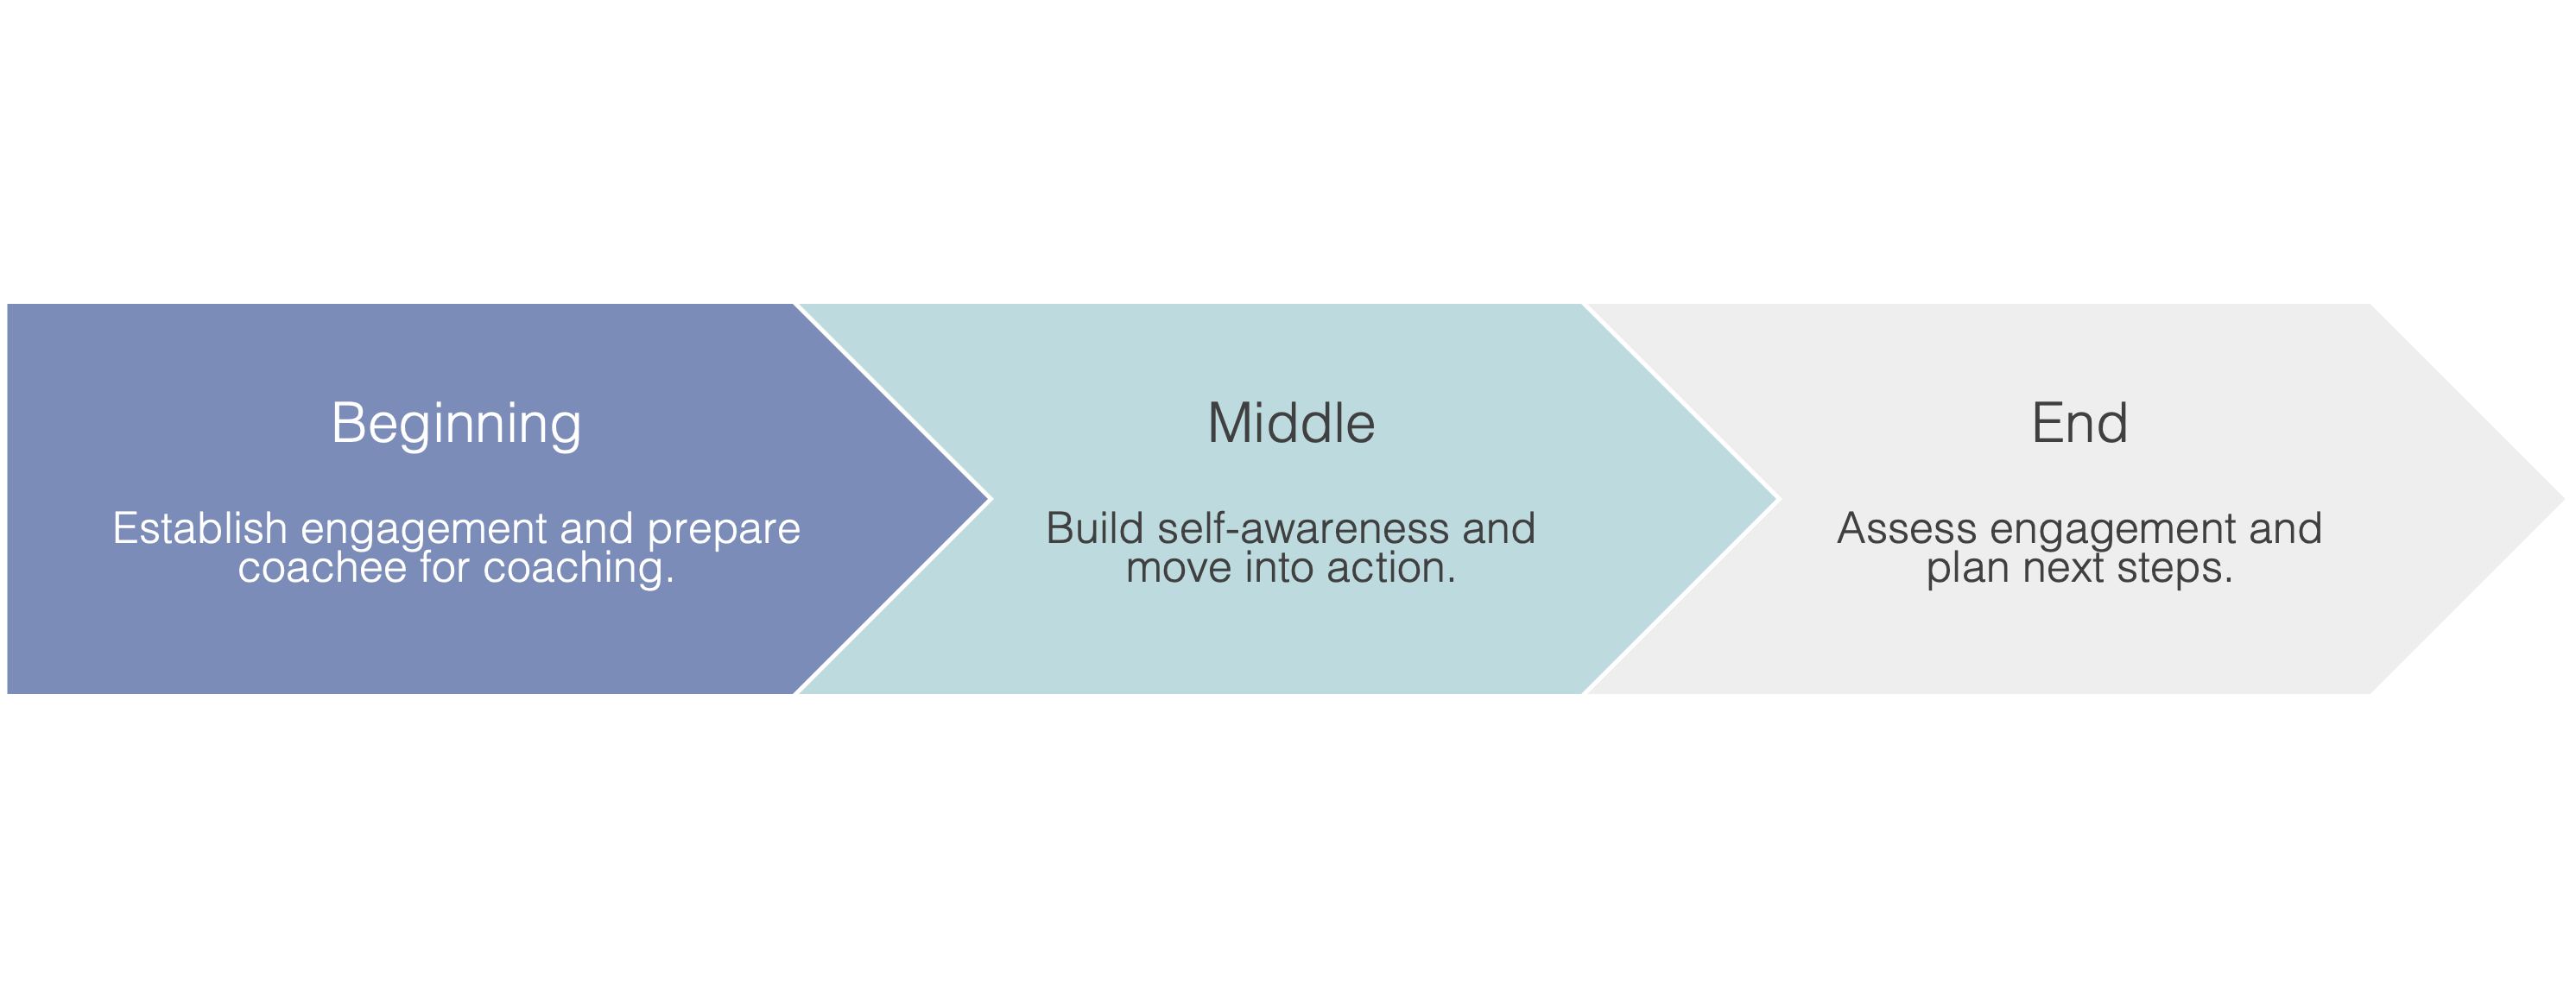 Beginning: Establish engagement and prepare coachee for coaching. Middle: Build self-awareness and move into action. End: Assess engagement and plan next steps.